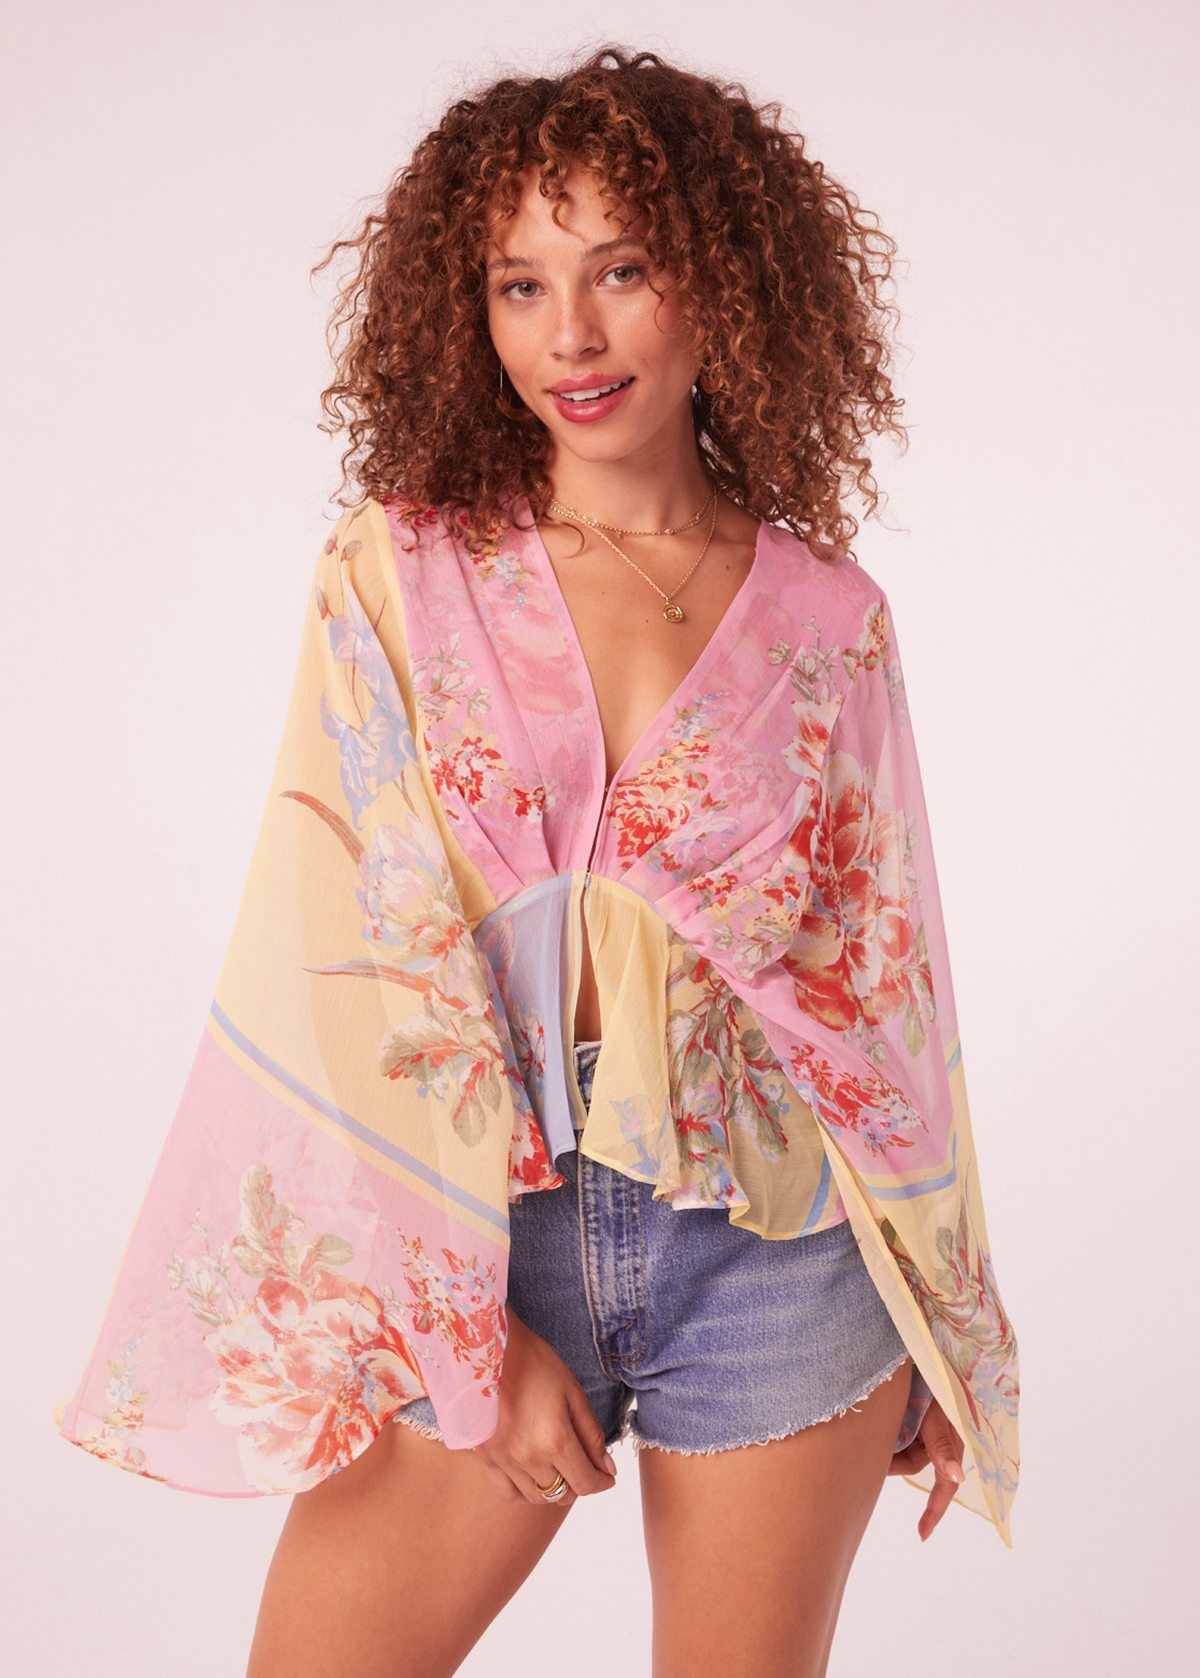 70s inspired dreamy floaty chiffon batwing cape top in yellow, pink, and blue floral by Band of the Free